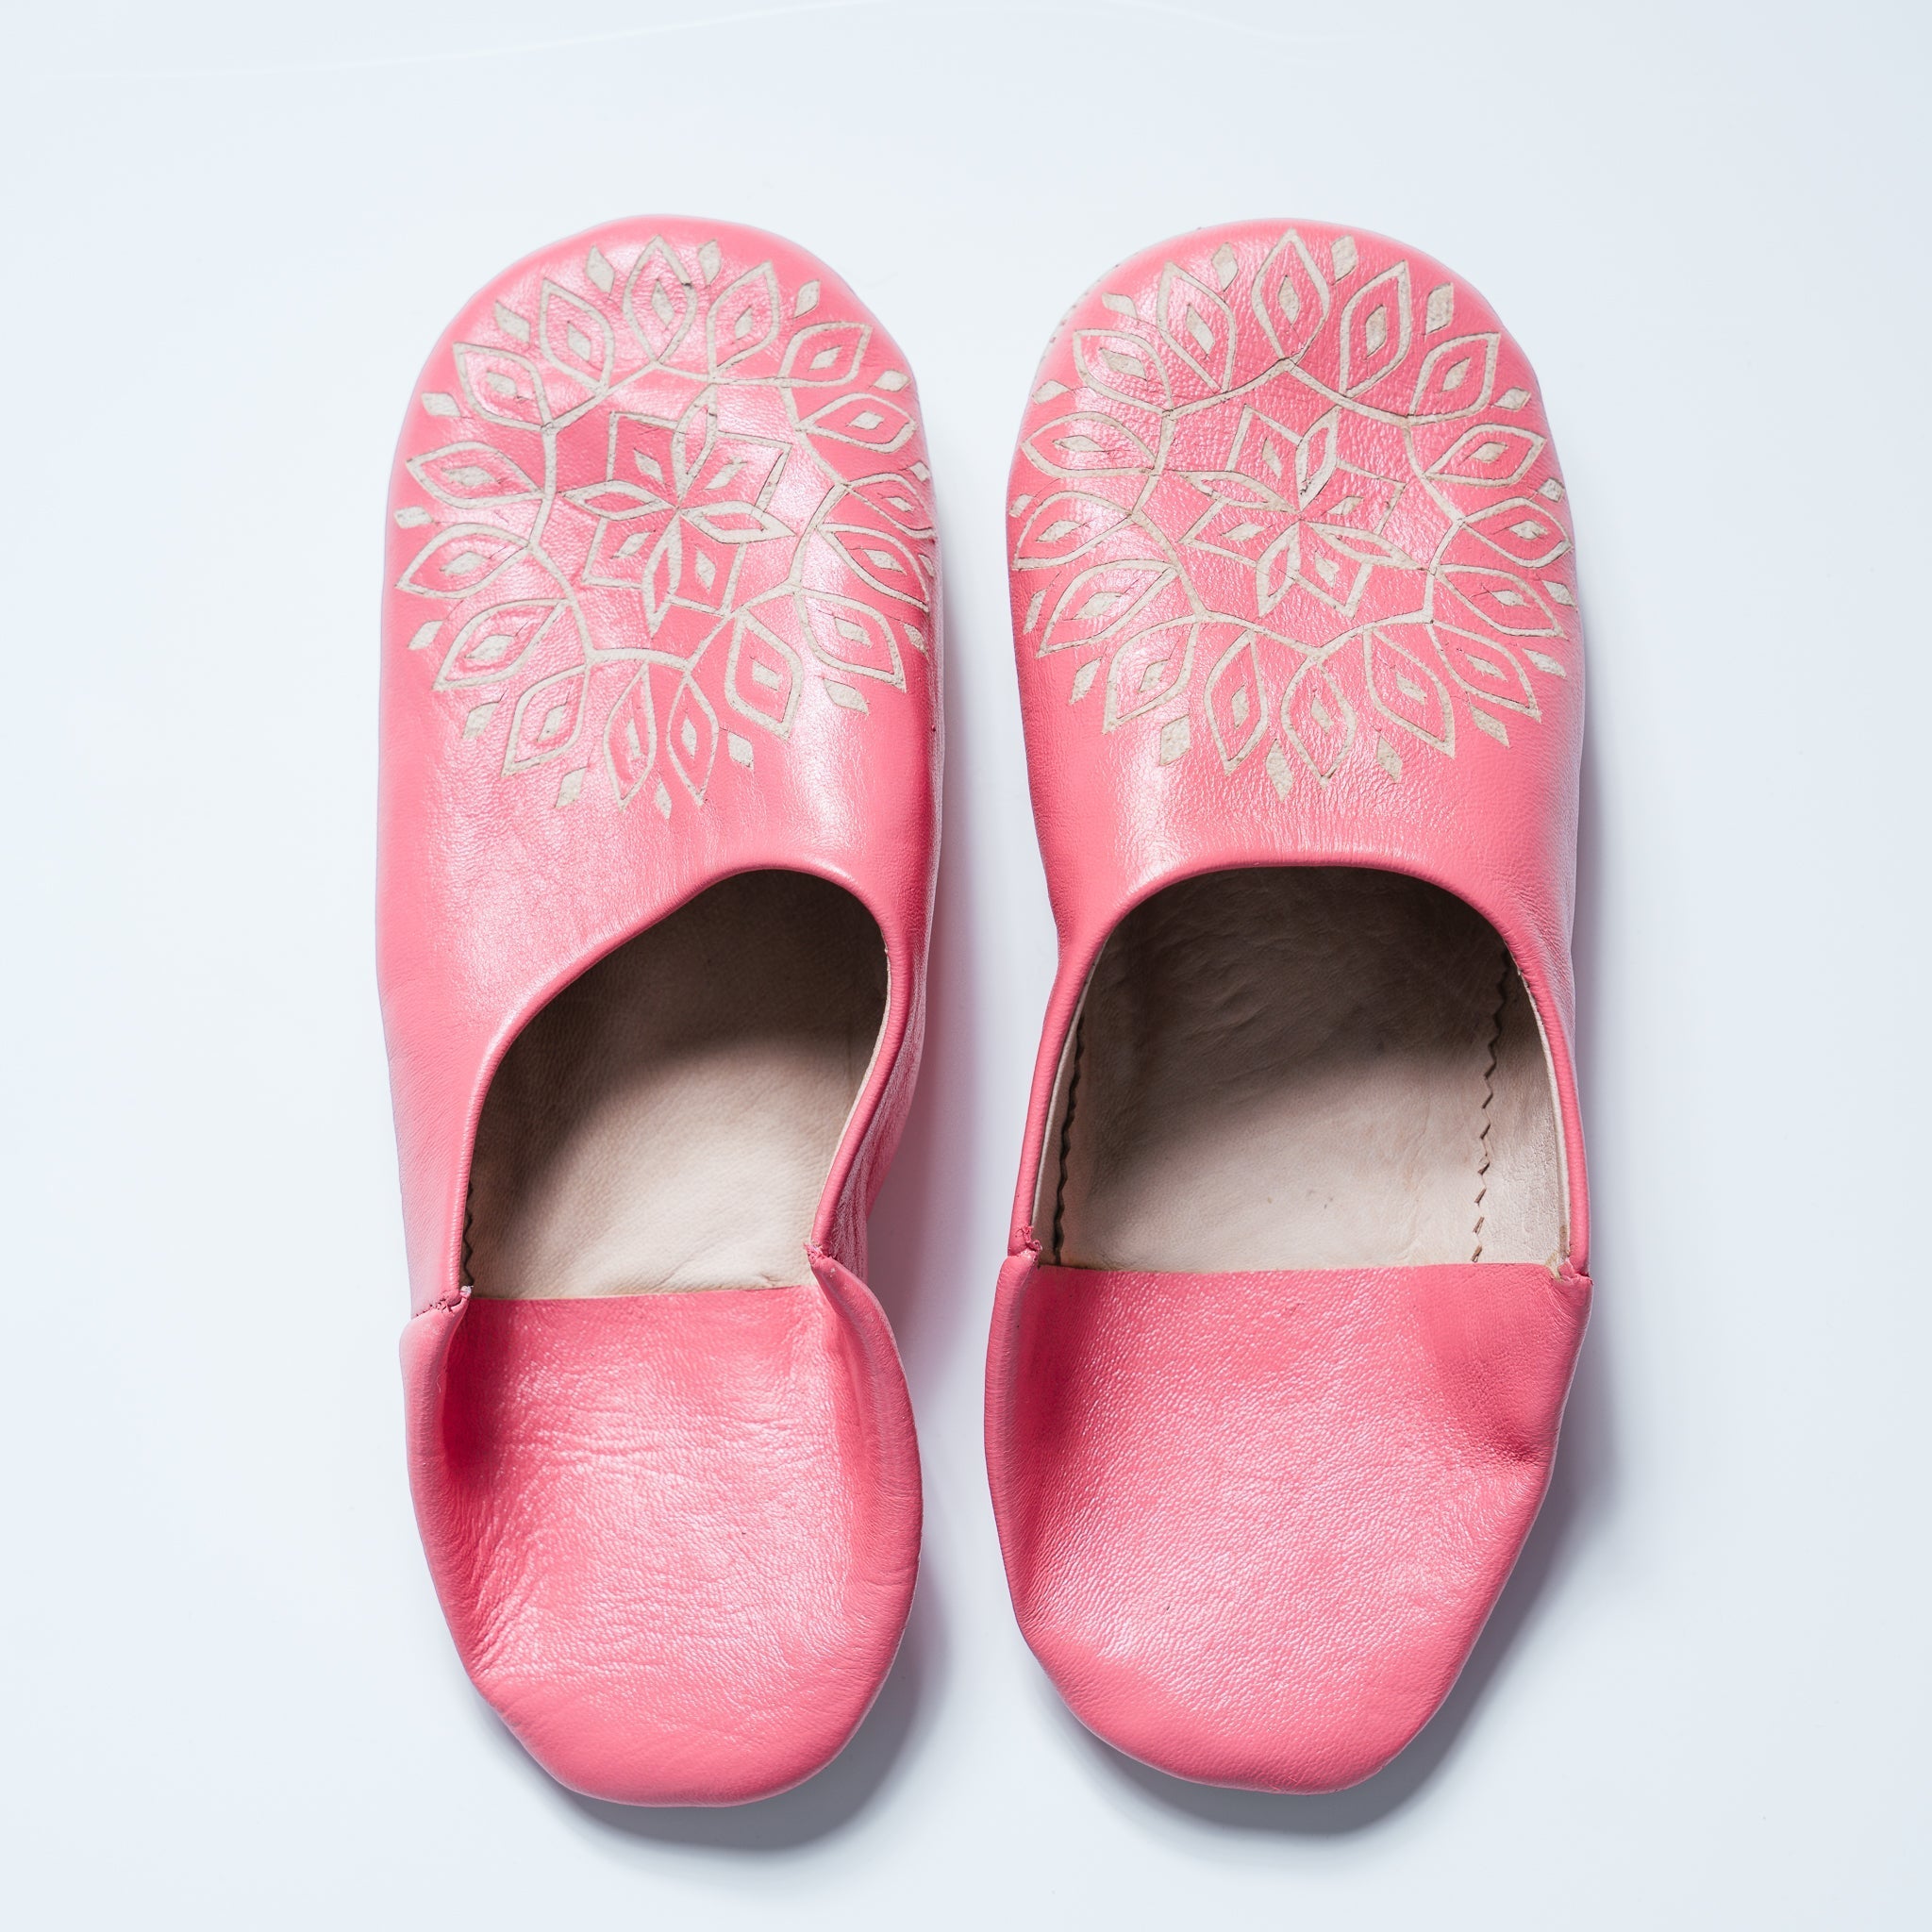 Moroccan Slippers pink